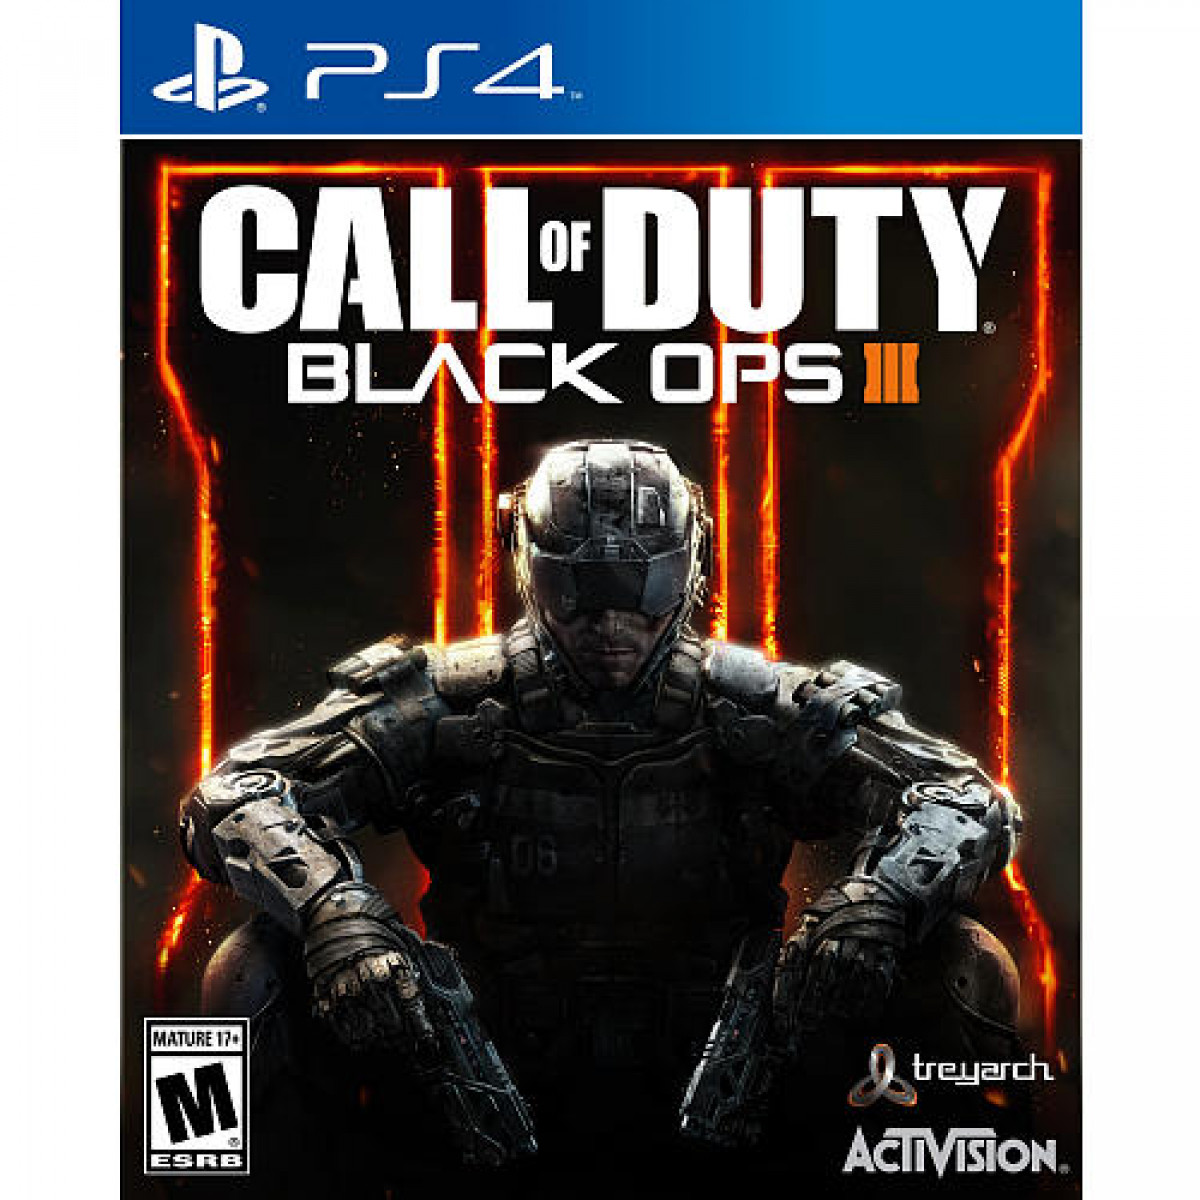 sony ps4 call of duty black ops iii game cartidge